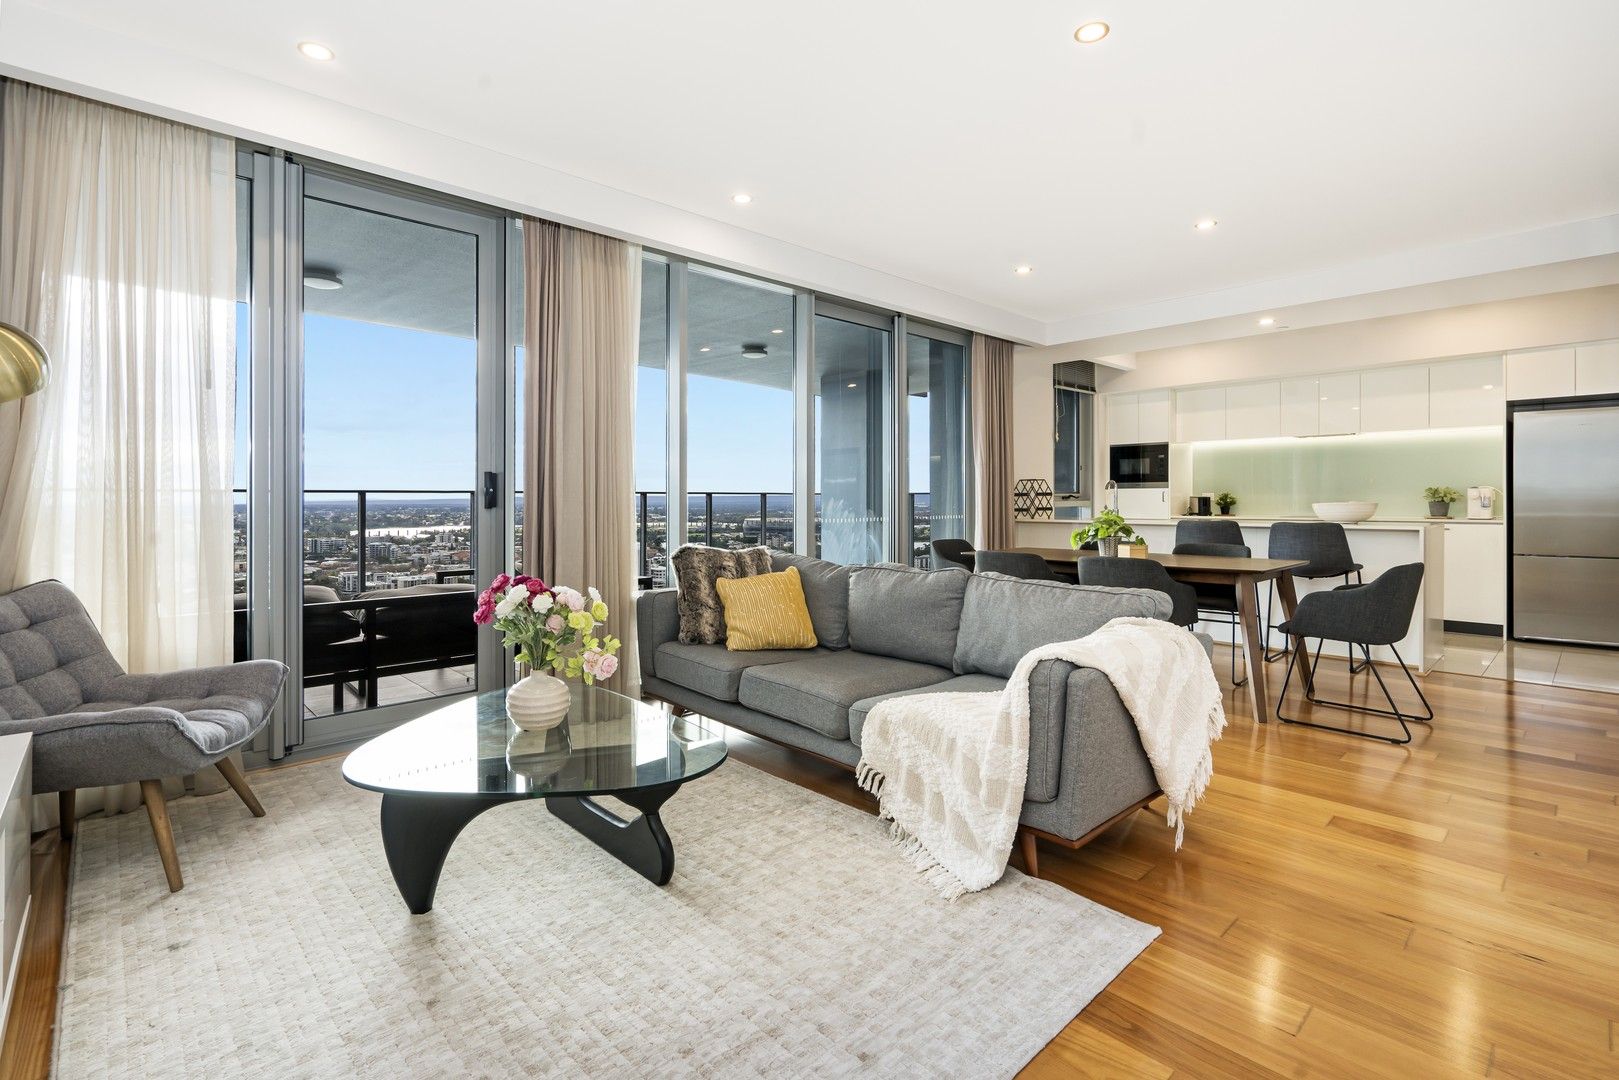 2 bedrooms Apartment / Unit / Flat in 180/189 Adelaide Terrace EAST PERTH WA, 6004